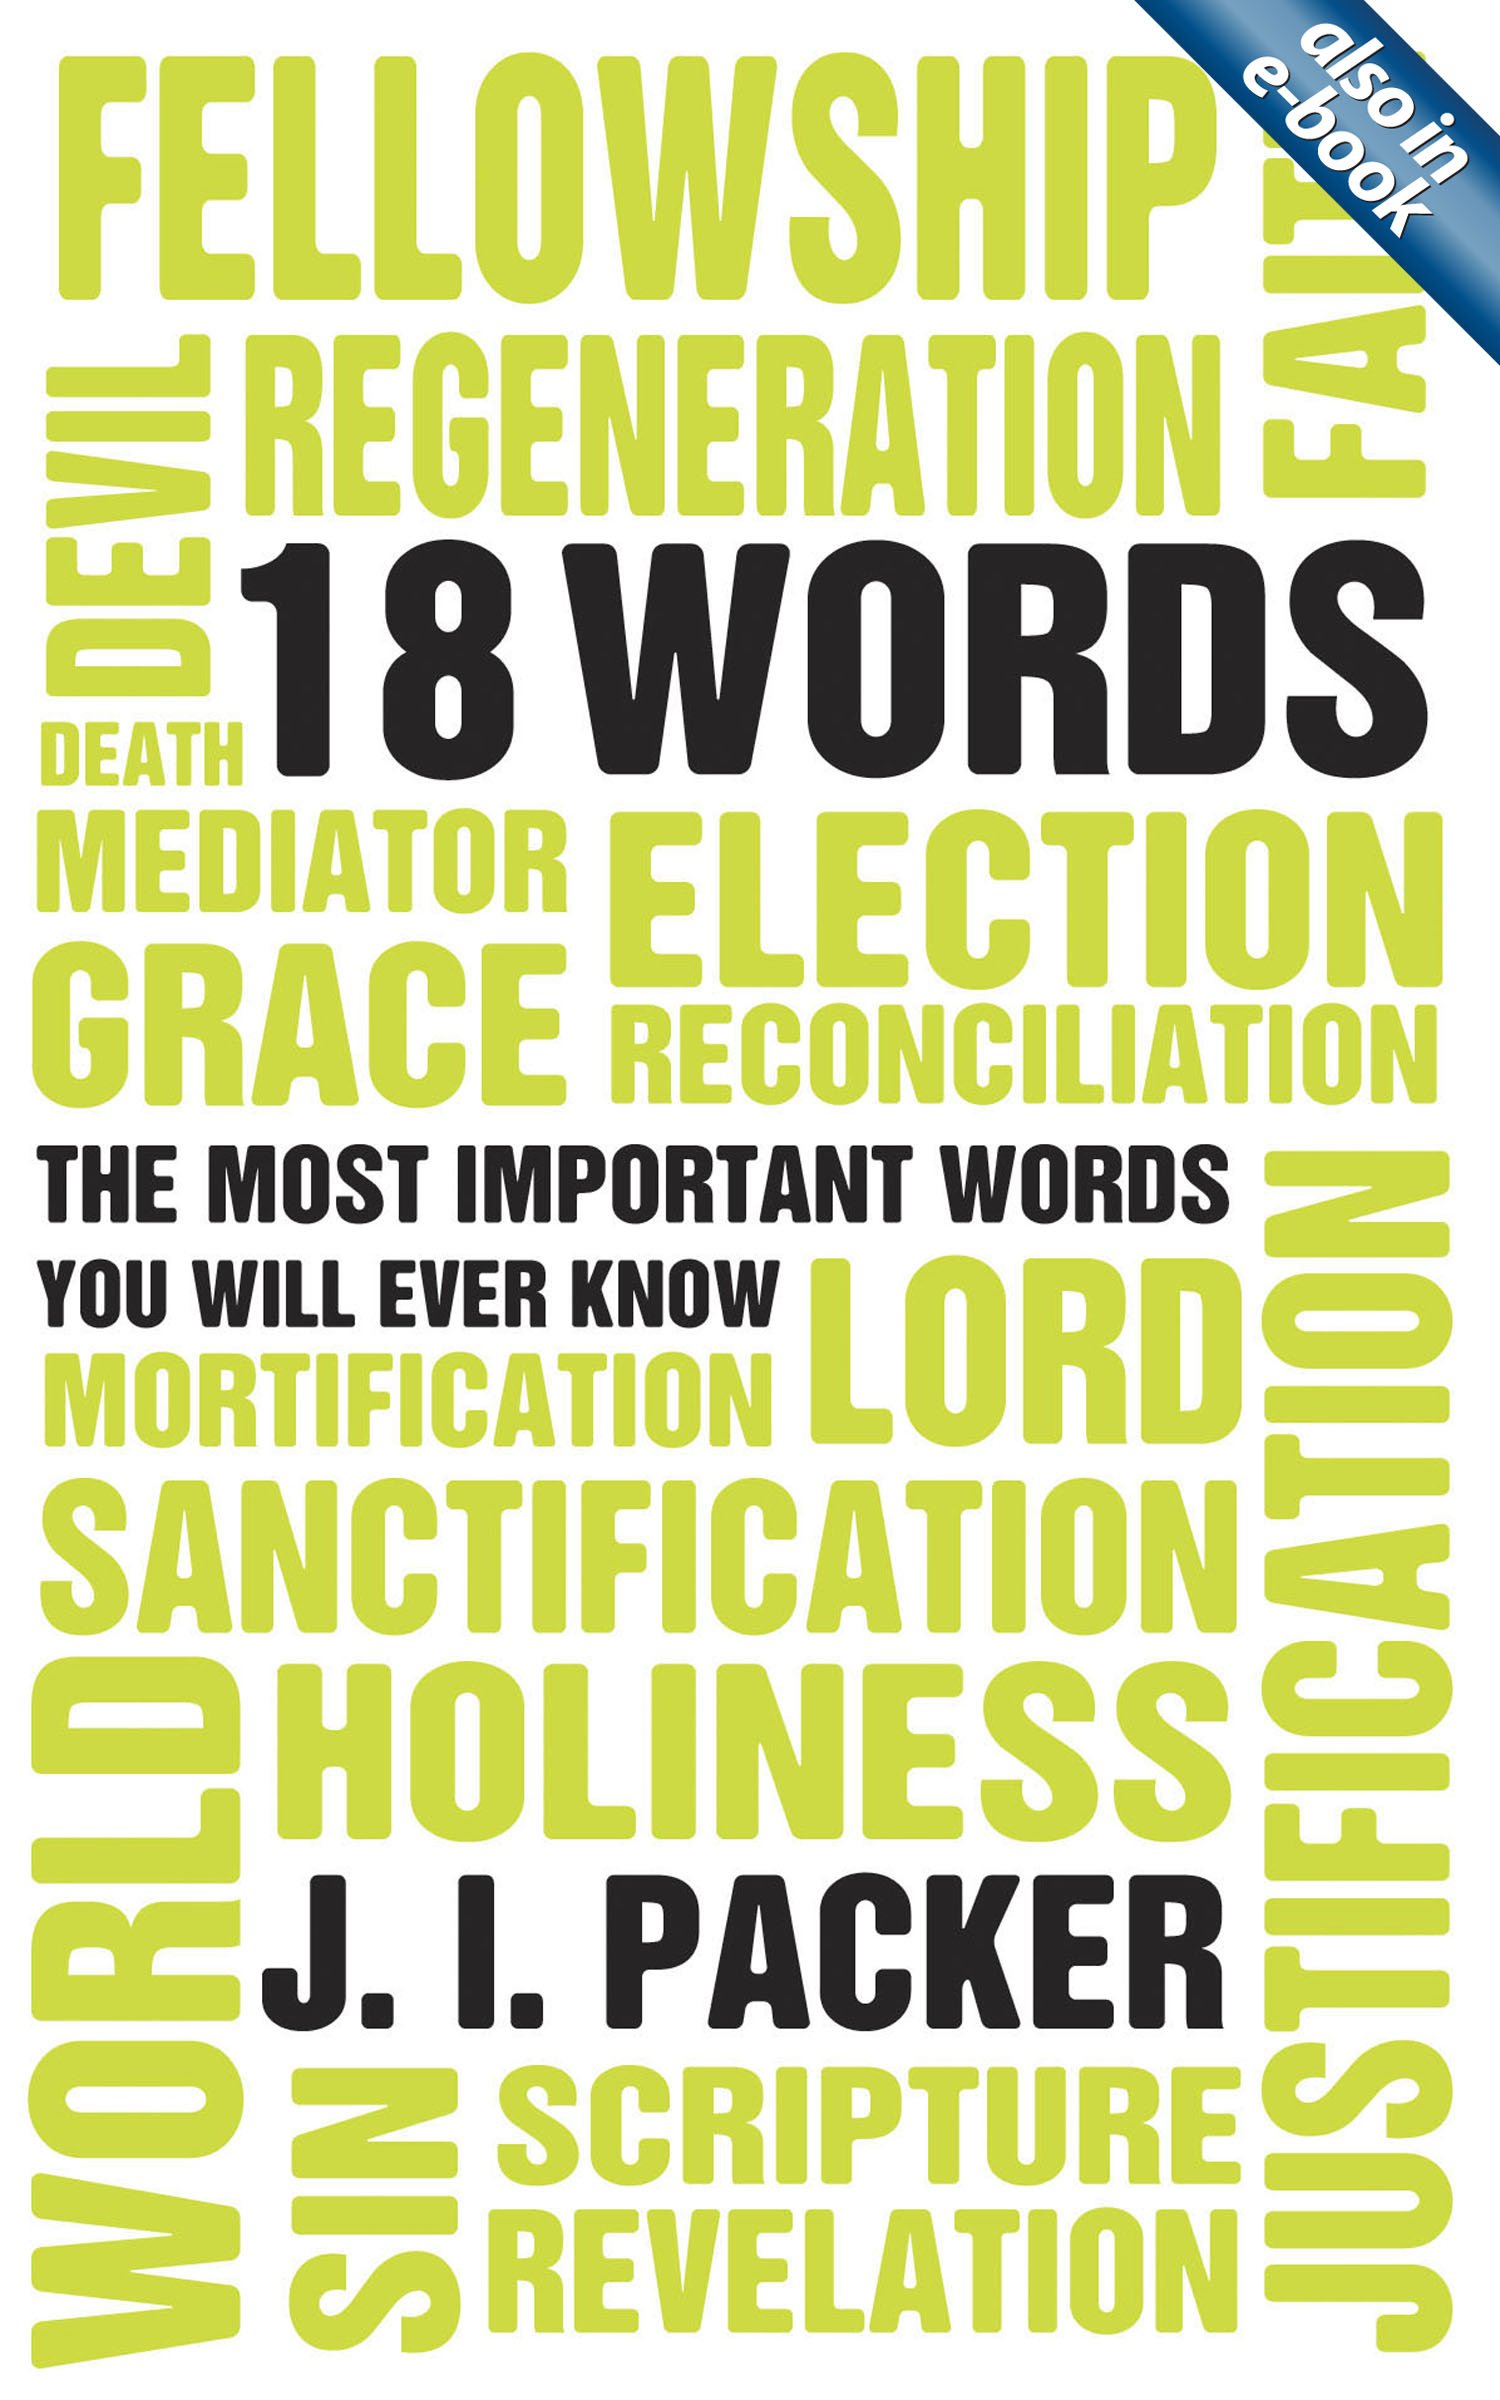 18 WORDS: THE MOST IMPORTANT WORDS YOU WILL EVER KNOW, by J.I. Packer